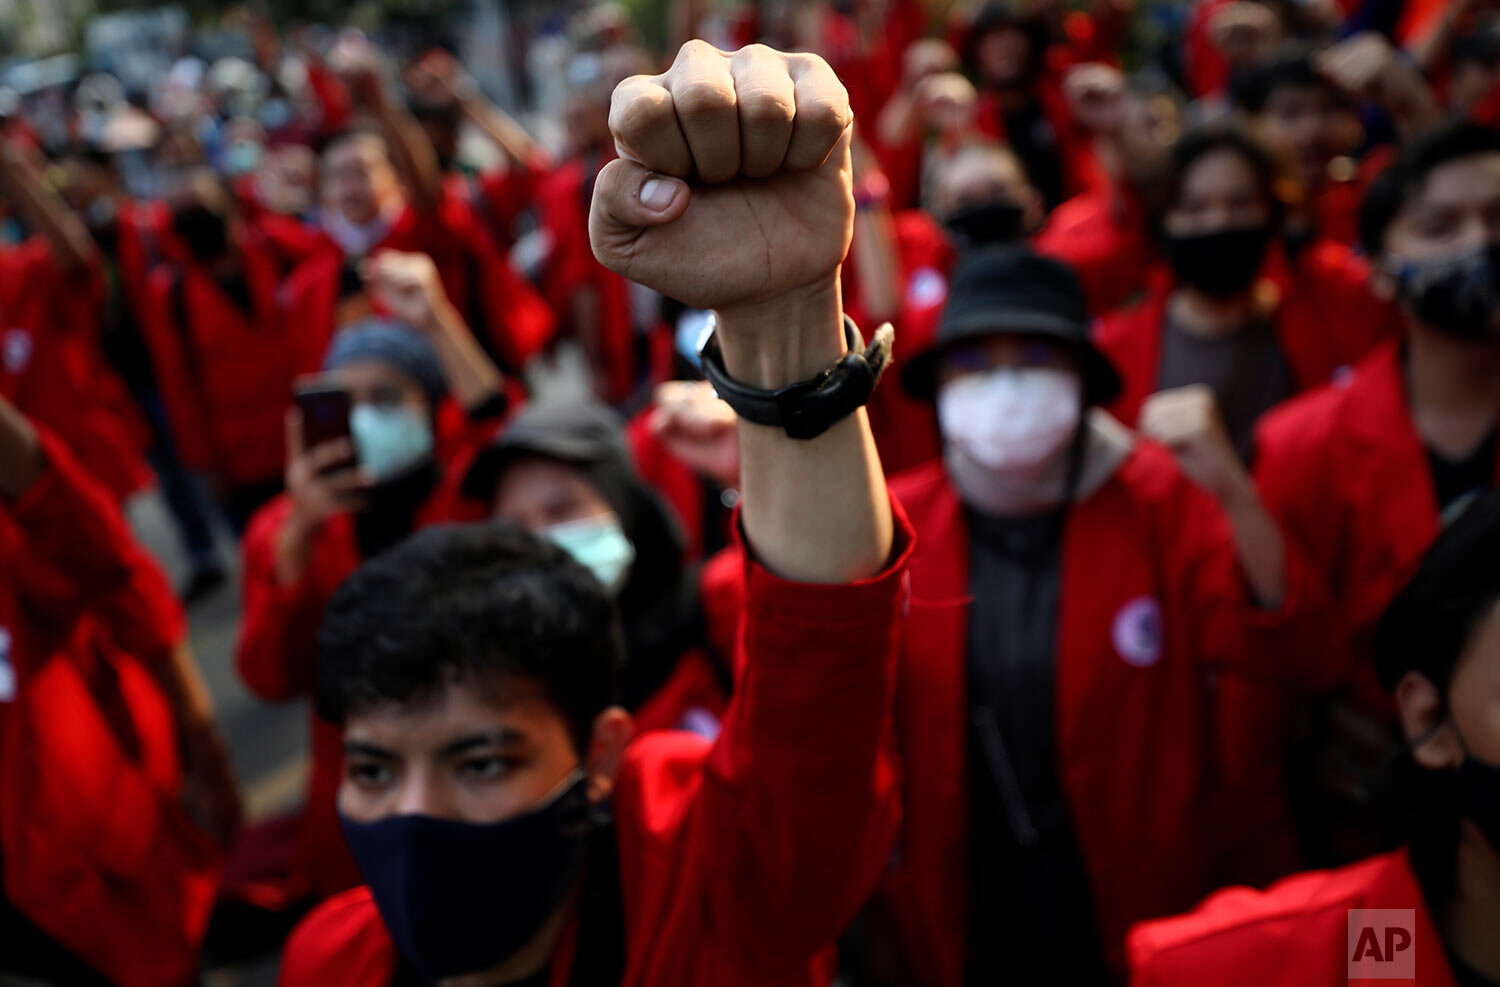  Student protesters raise their fists as they chant slogans during a protest against a new Job Creation Law in Jakarta, Indonesia, Wednesday, Oct. 28, 2020.  (AP Photo/Dita Alangkara) 